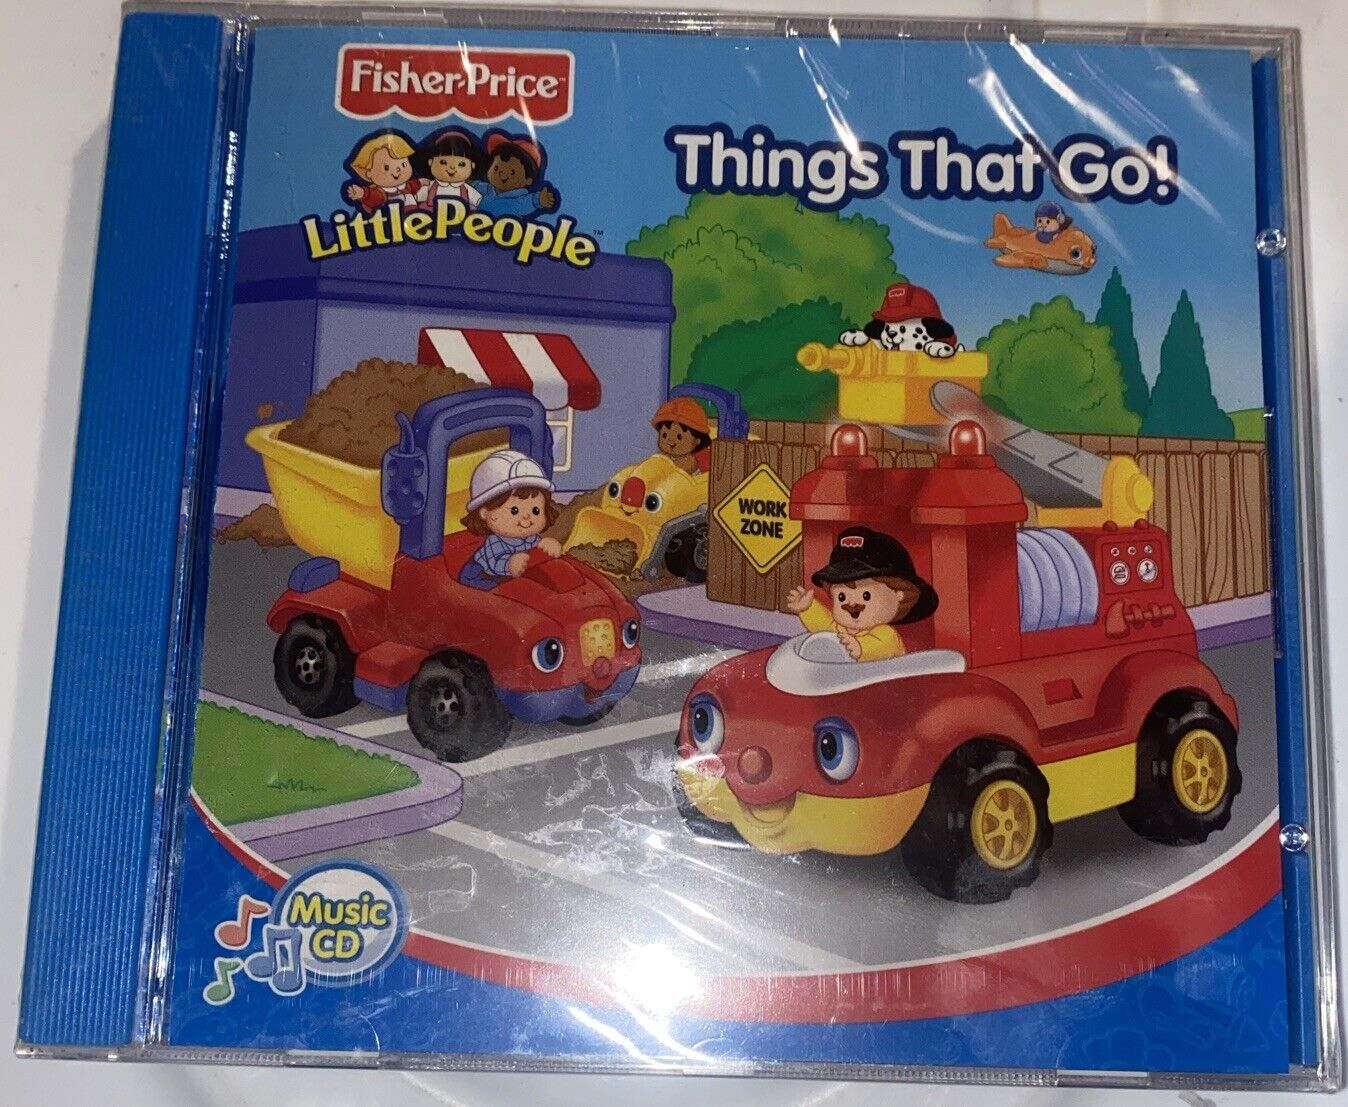 Little People: Things That Go by Fisher-Price (CD, Jan-2005, Fisher-Price)